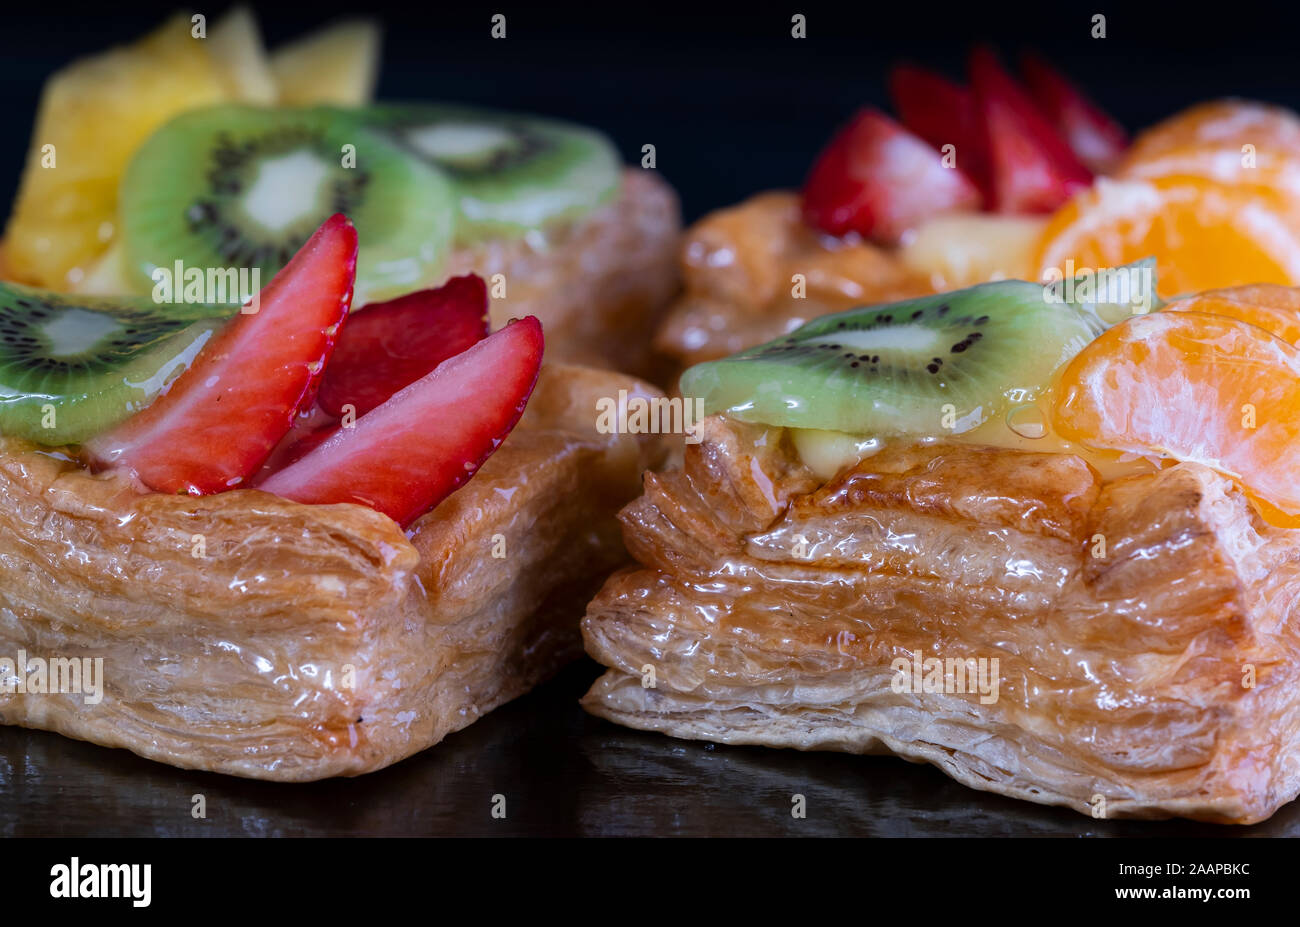 Delicious puff pastry with cream and fruits Stock Photo